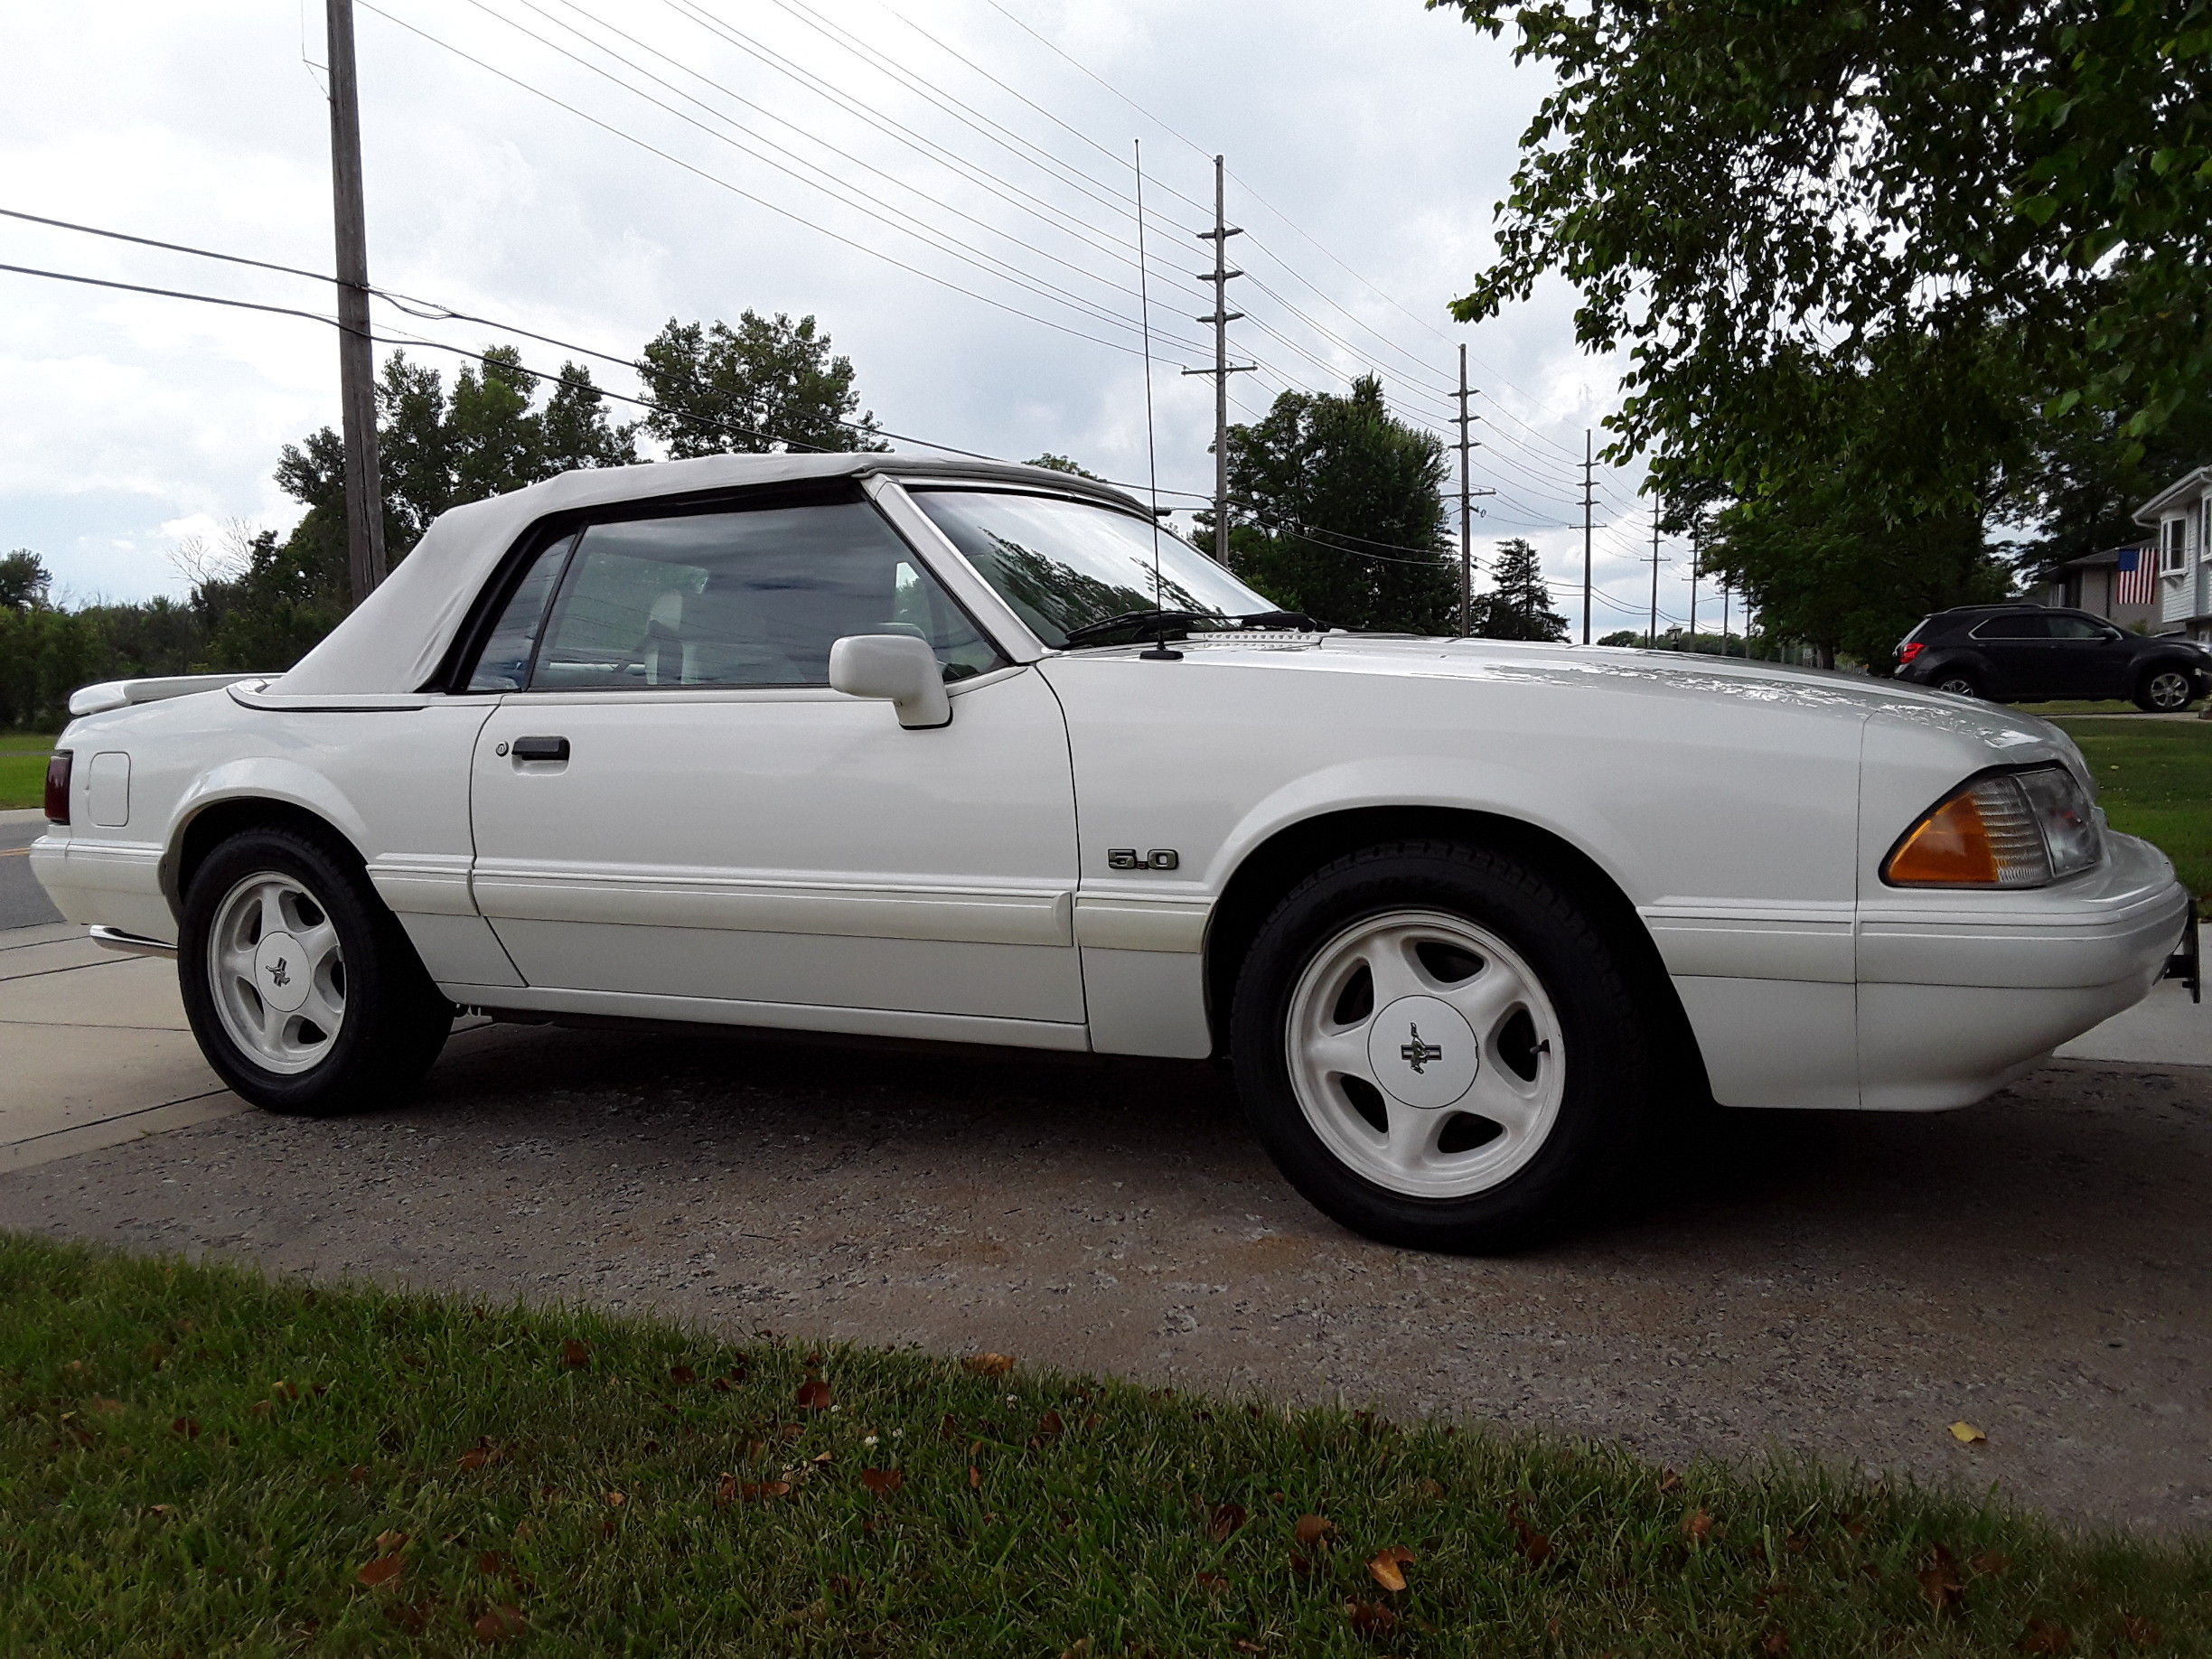 For sale: 1993 Ford Mustang Triple White Feature Car/Automatic/67k miles